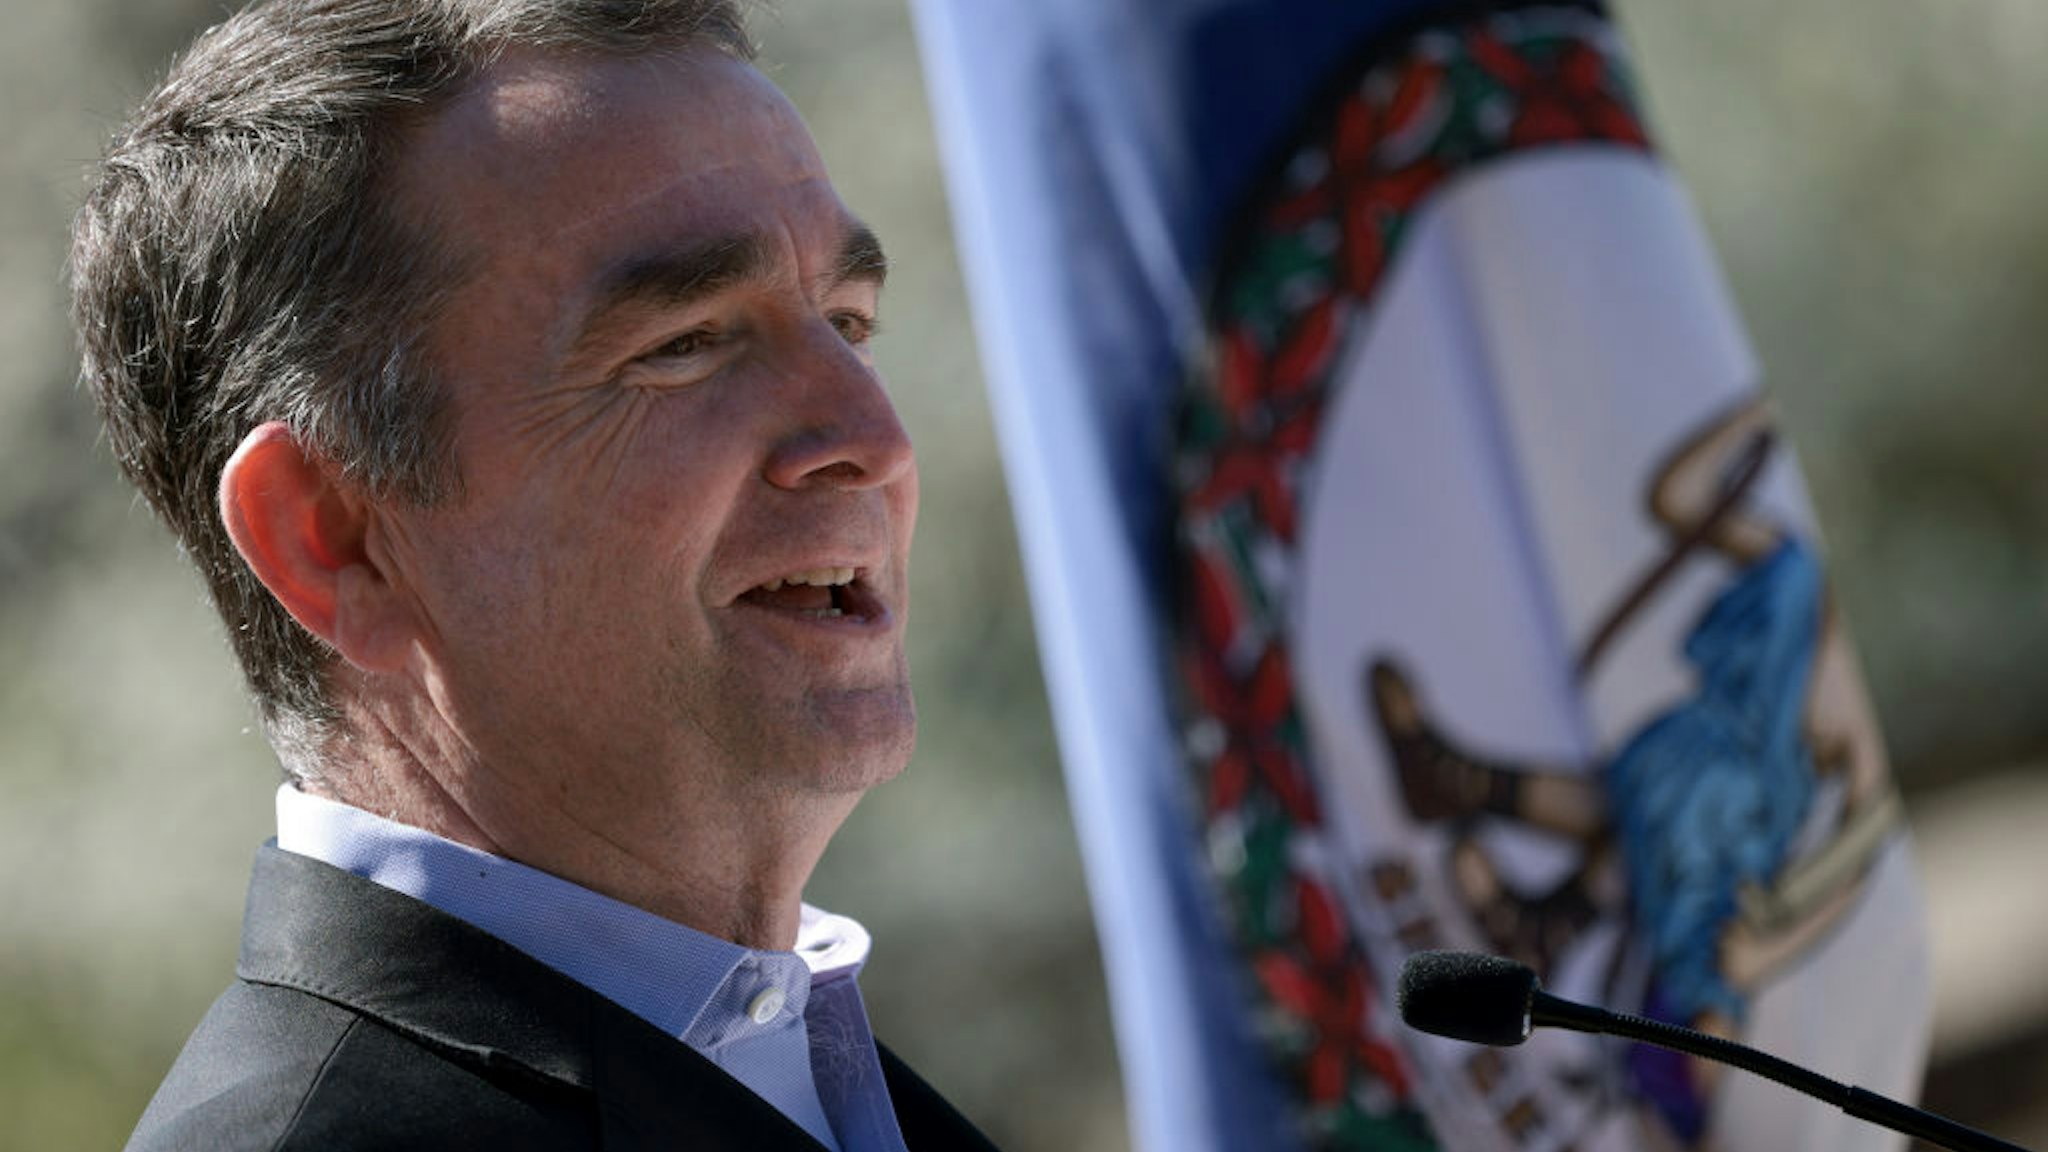 ALEXANDRIA, VIRGINIA - MARCH 30: Virginia Gov. Ralph Northam speaks at an event titled “Transforming Rail in Virginia” at the Amtrak-VRE station in March 30, 2021 in Alexandria, Virginia. The Transforming Rail in Virginia program will cost about $3.7 billion and will double Amtrak service and double Virginia Railway Express (VRE) service along the I-95 corridor, as well as work toward the separation of freight and passenger lines. (Photo by Win McNamee/Getty Images)